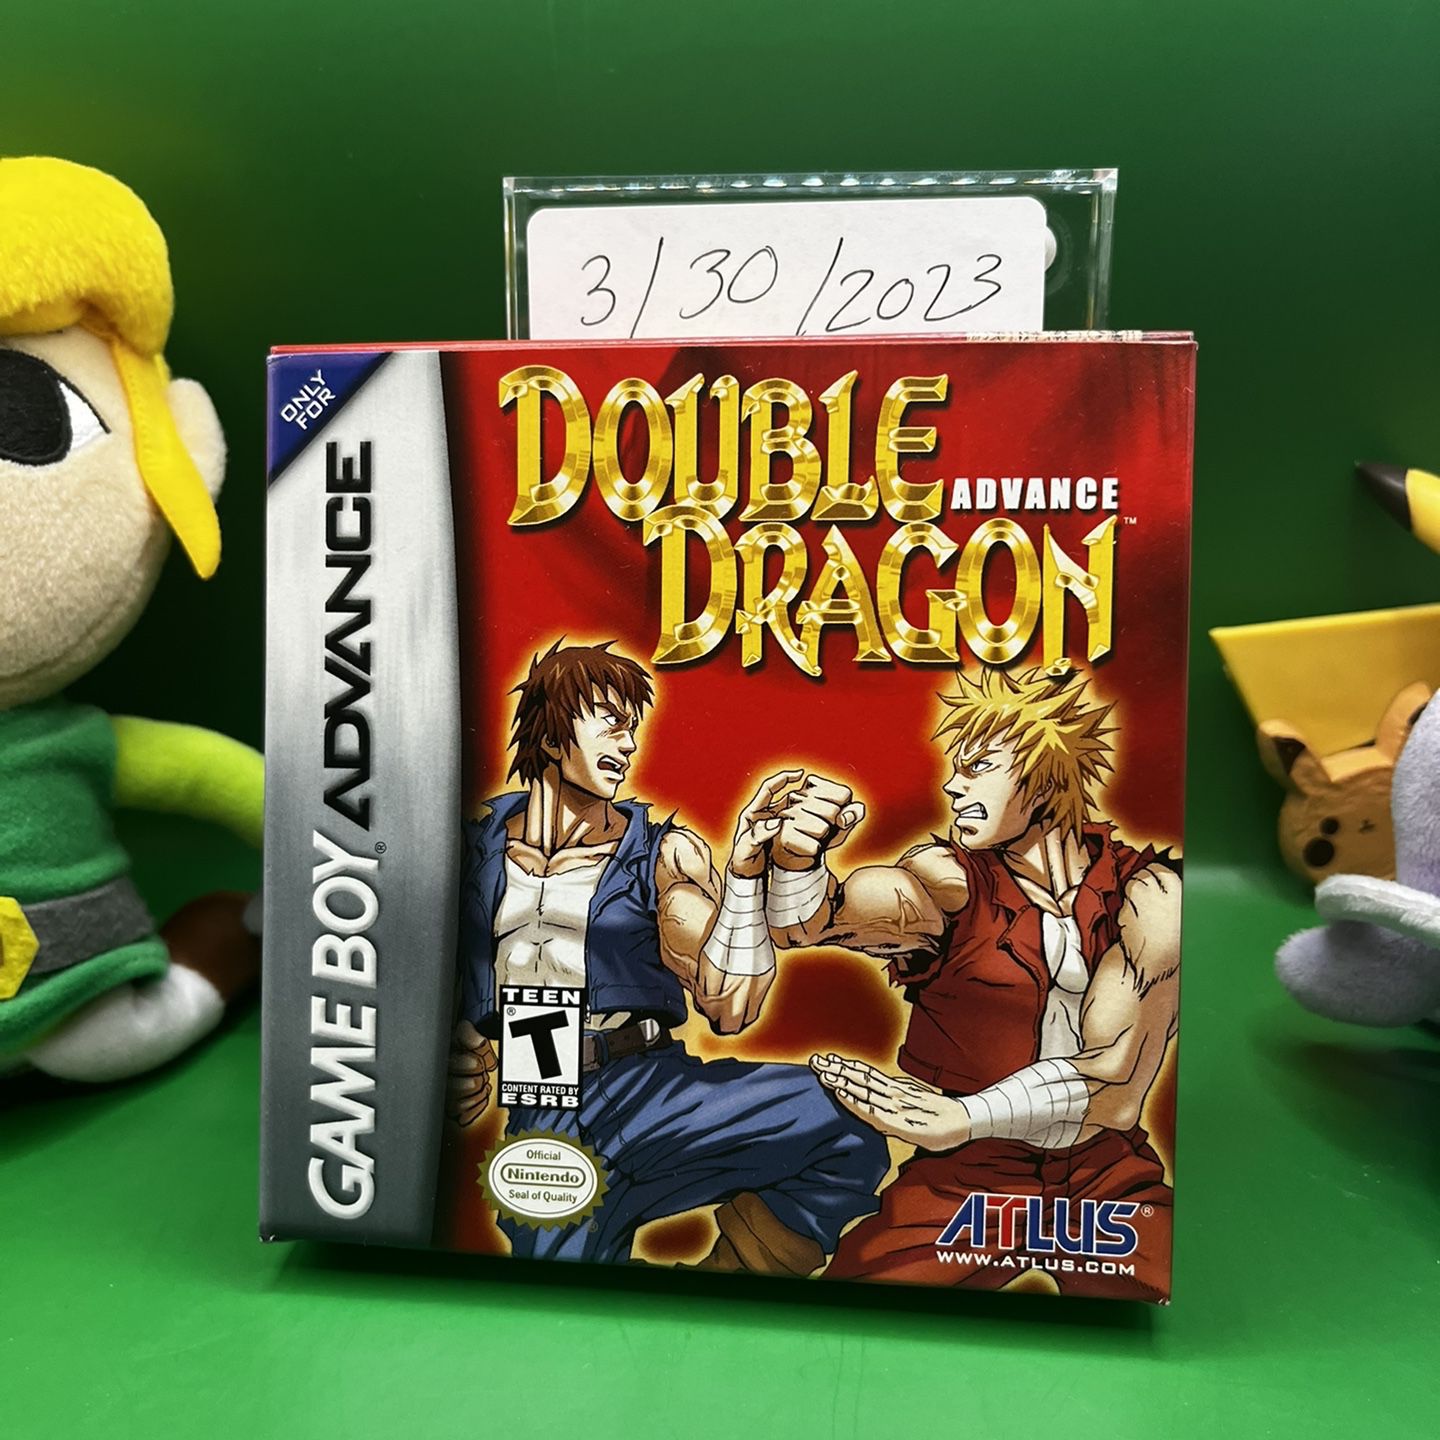 Double Dragon Advance Cib for Sale in Federal Way, WA - OfferUp